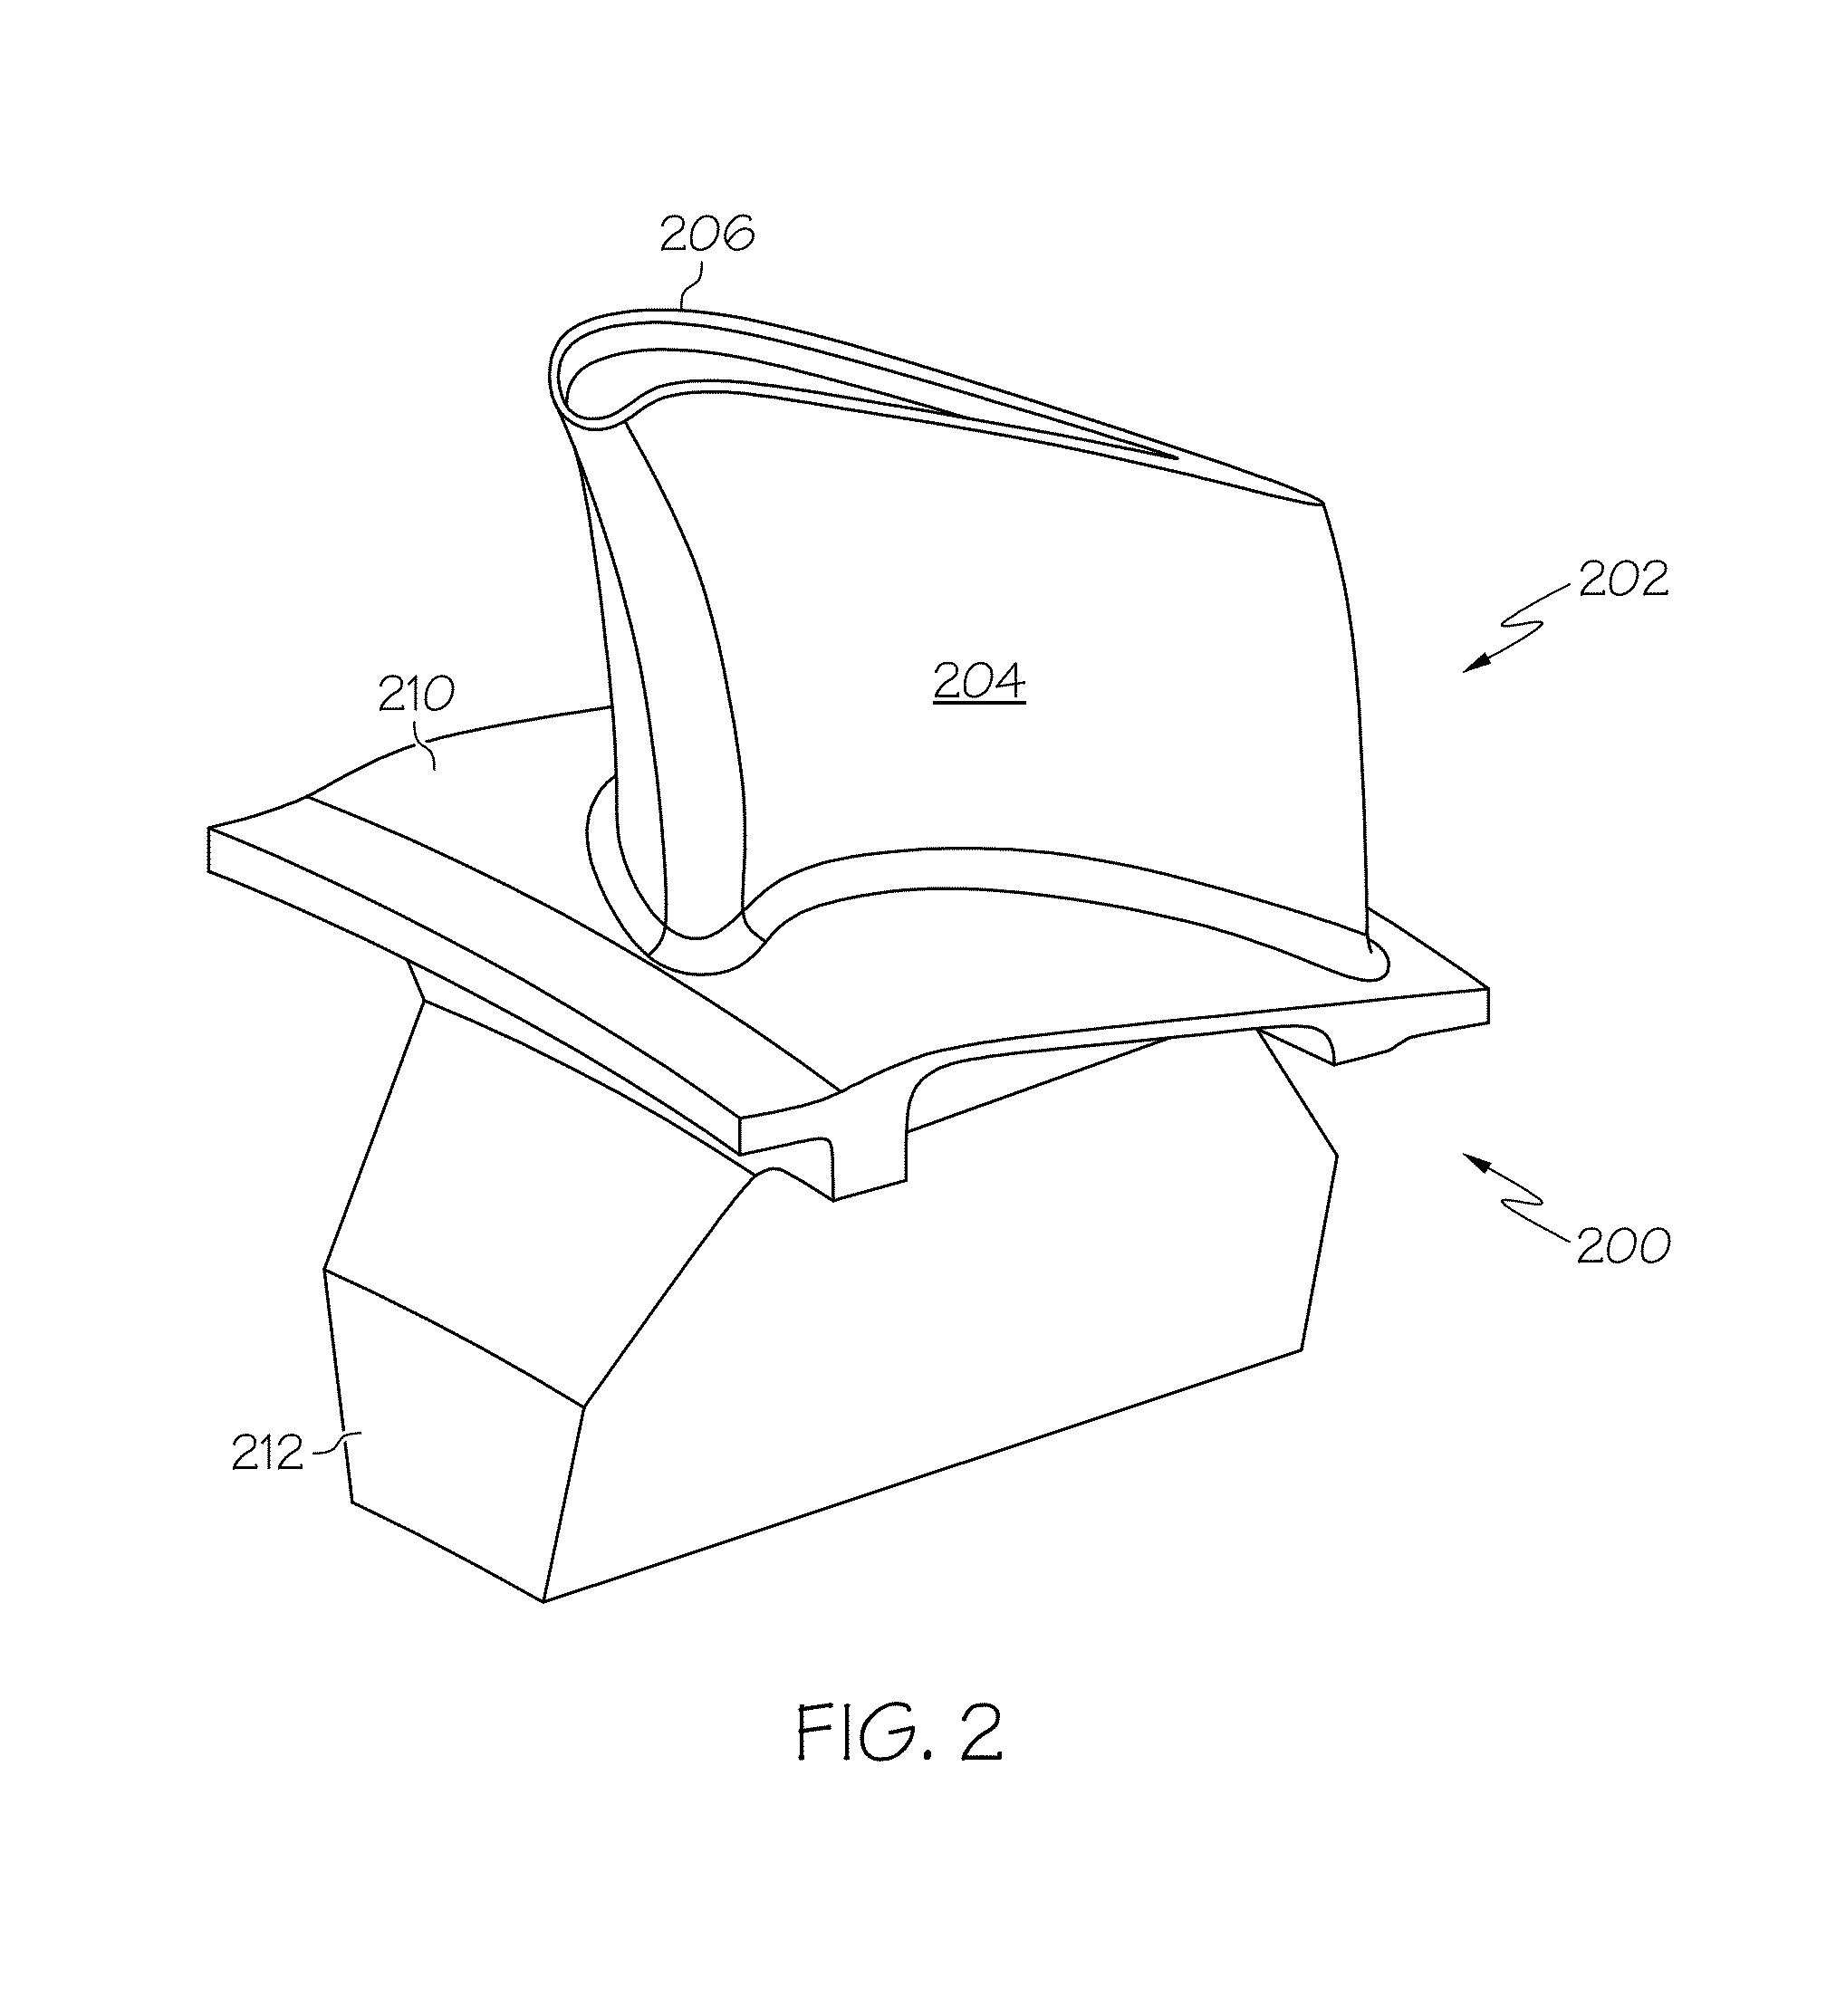 Methods for manufacturing components from articles formed by additive-manufacturing processes